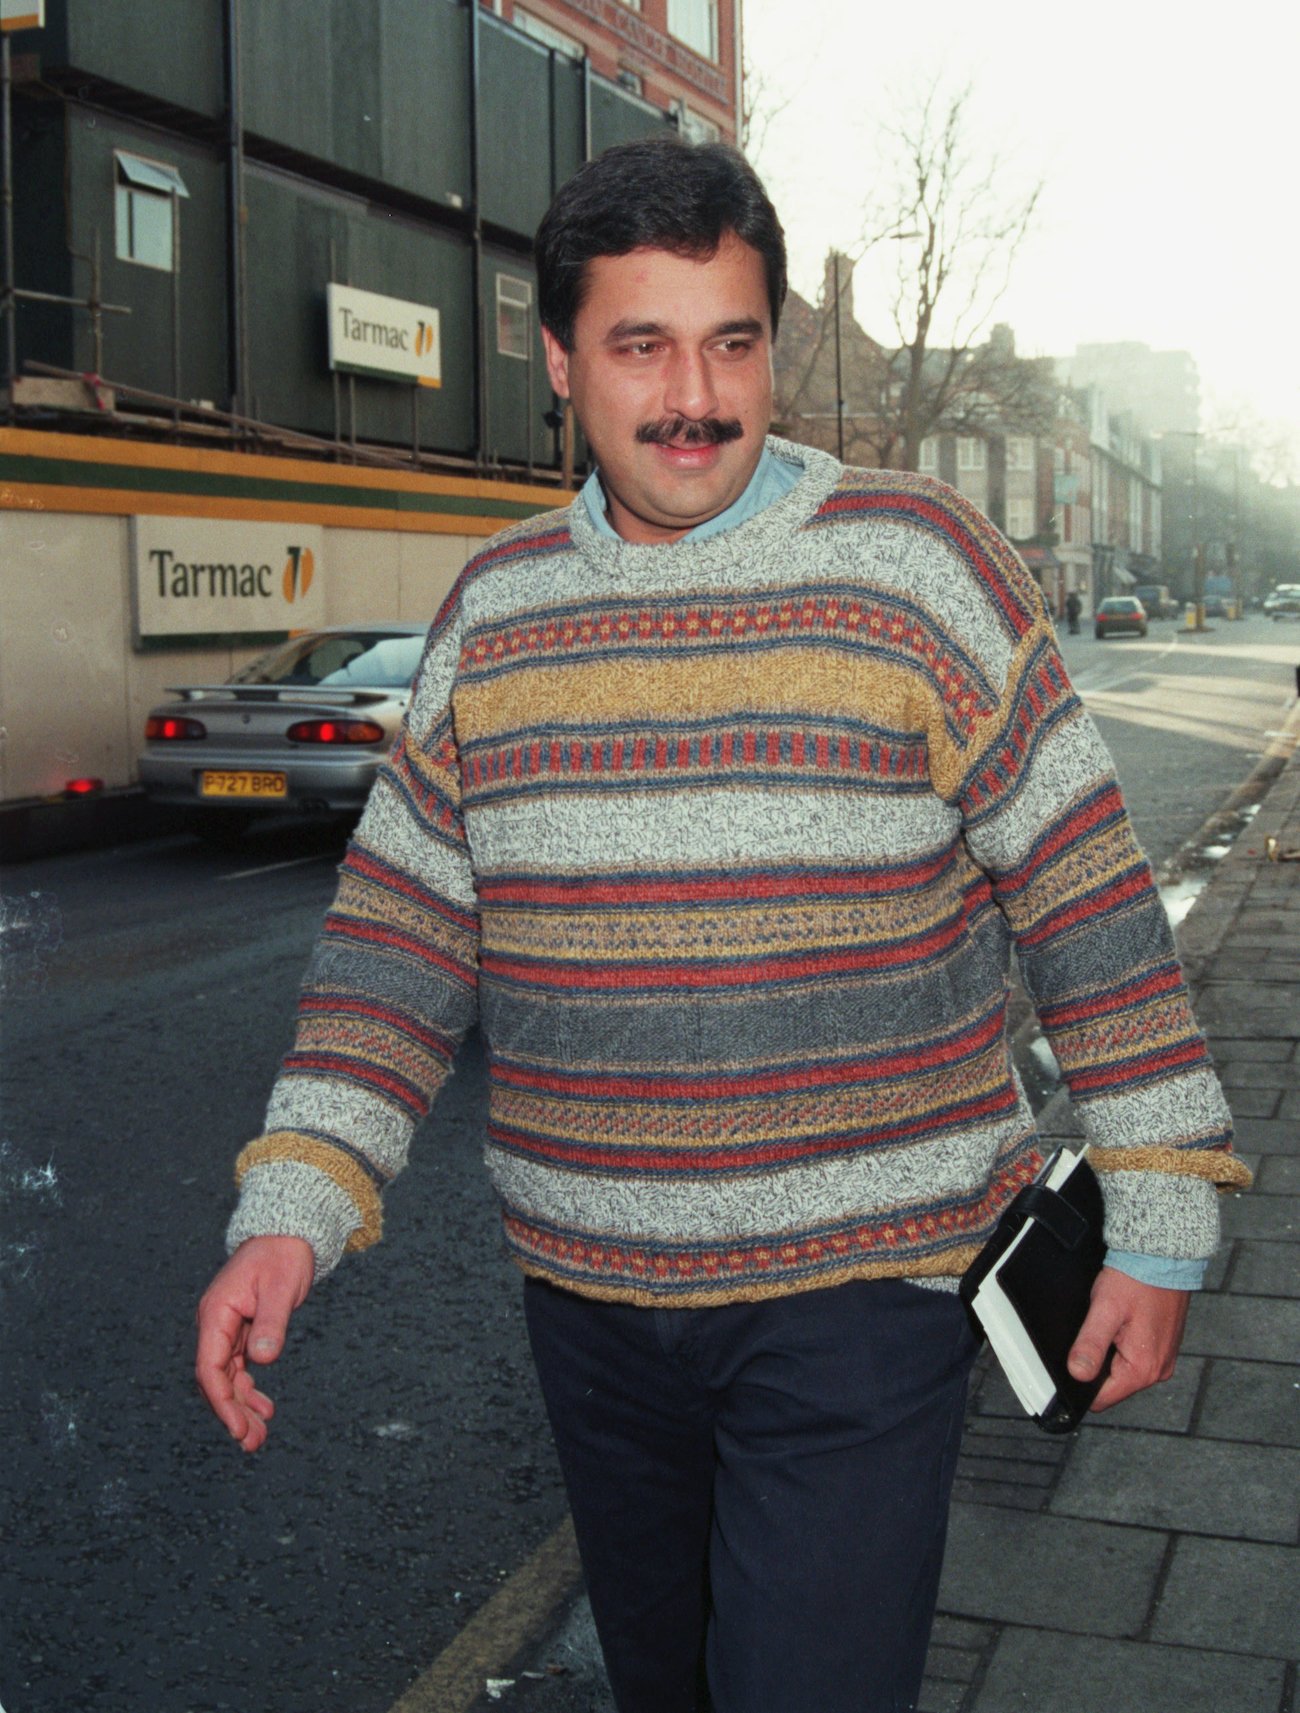 Hasnat Khan wearing a sweater and holding a book